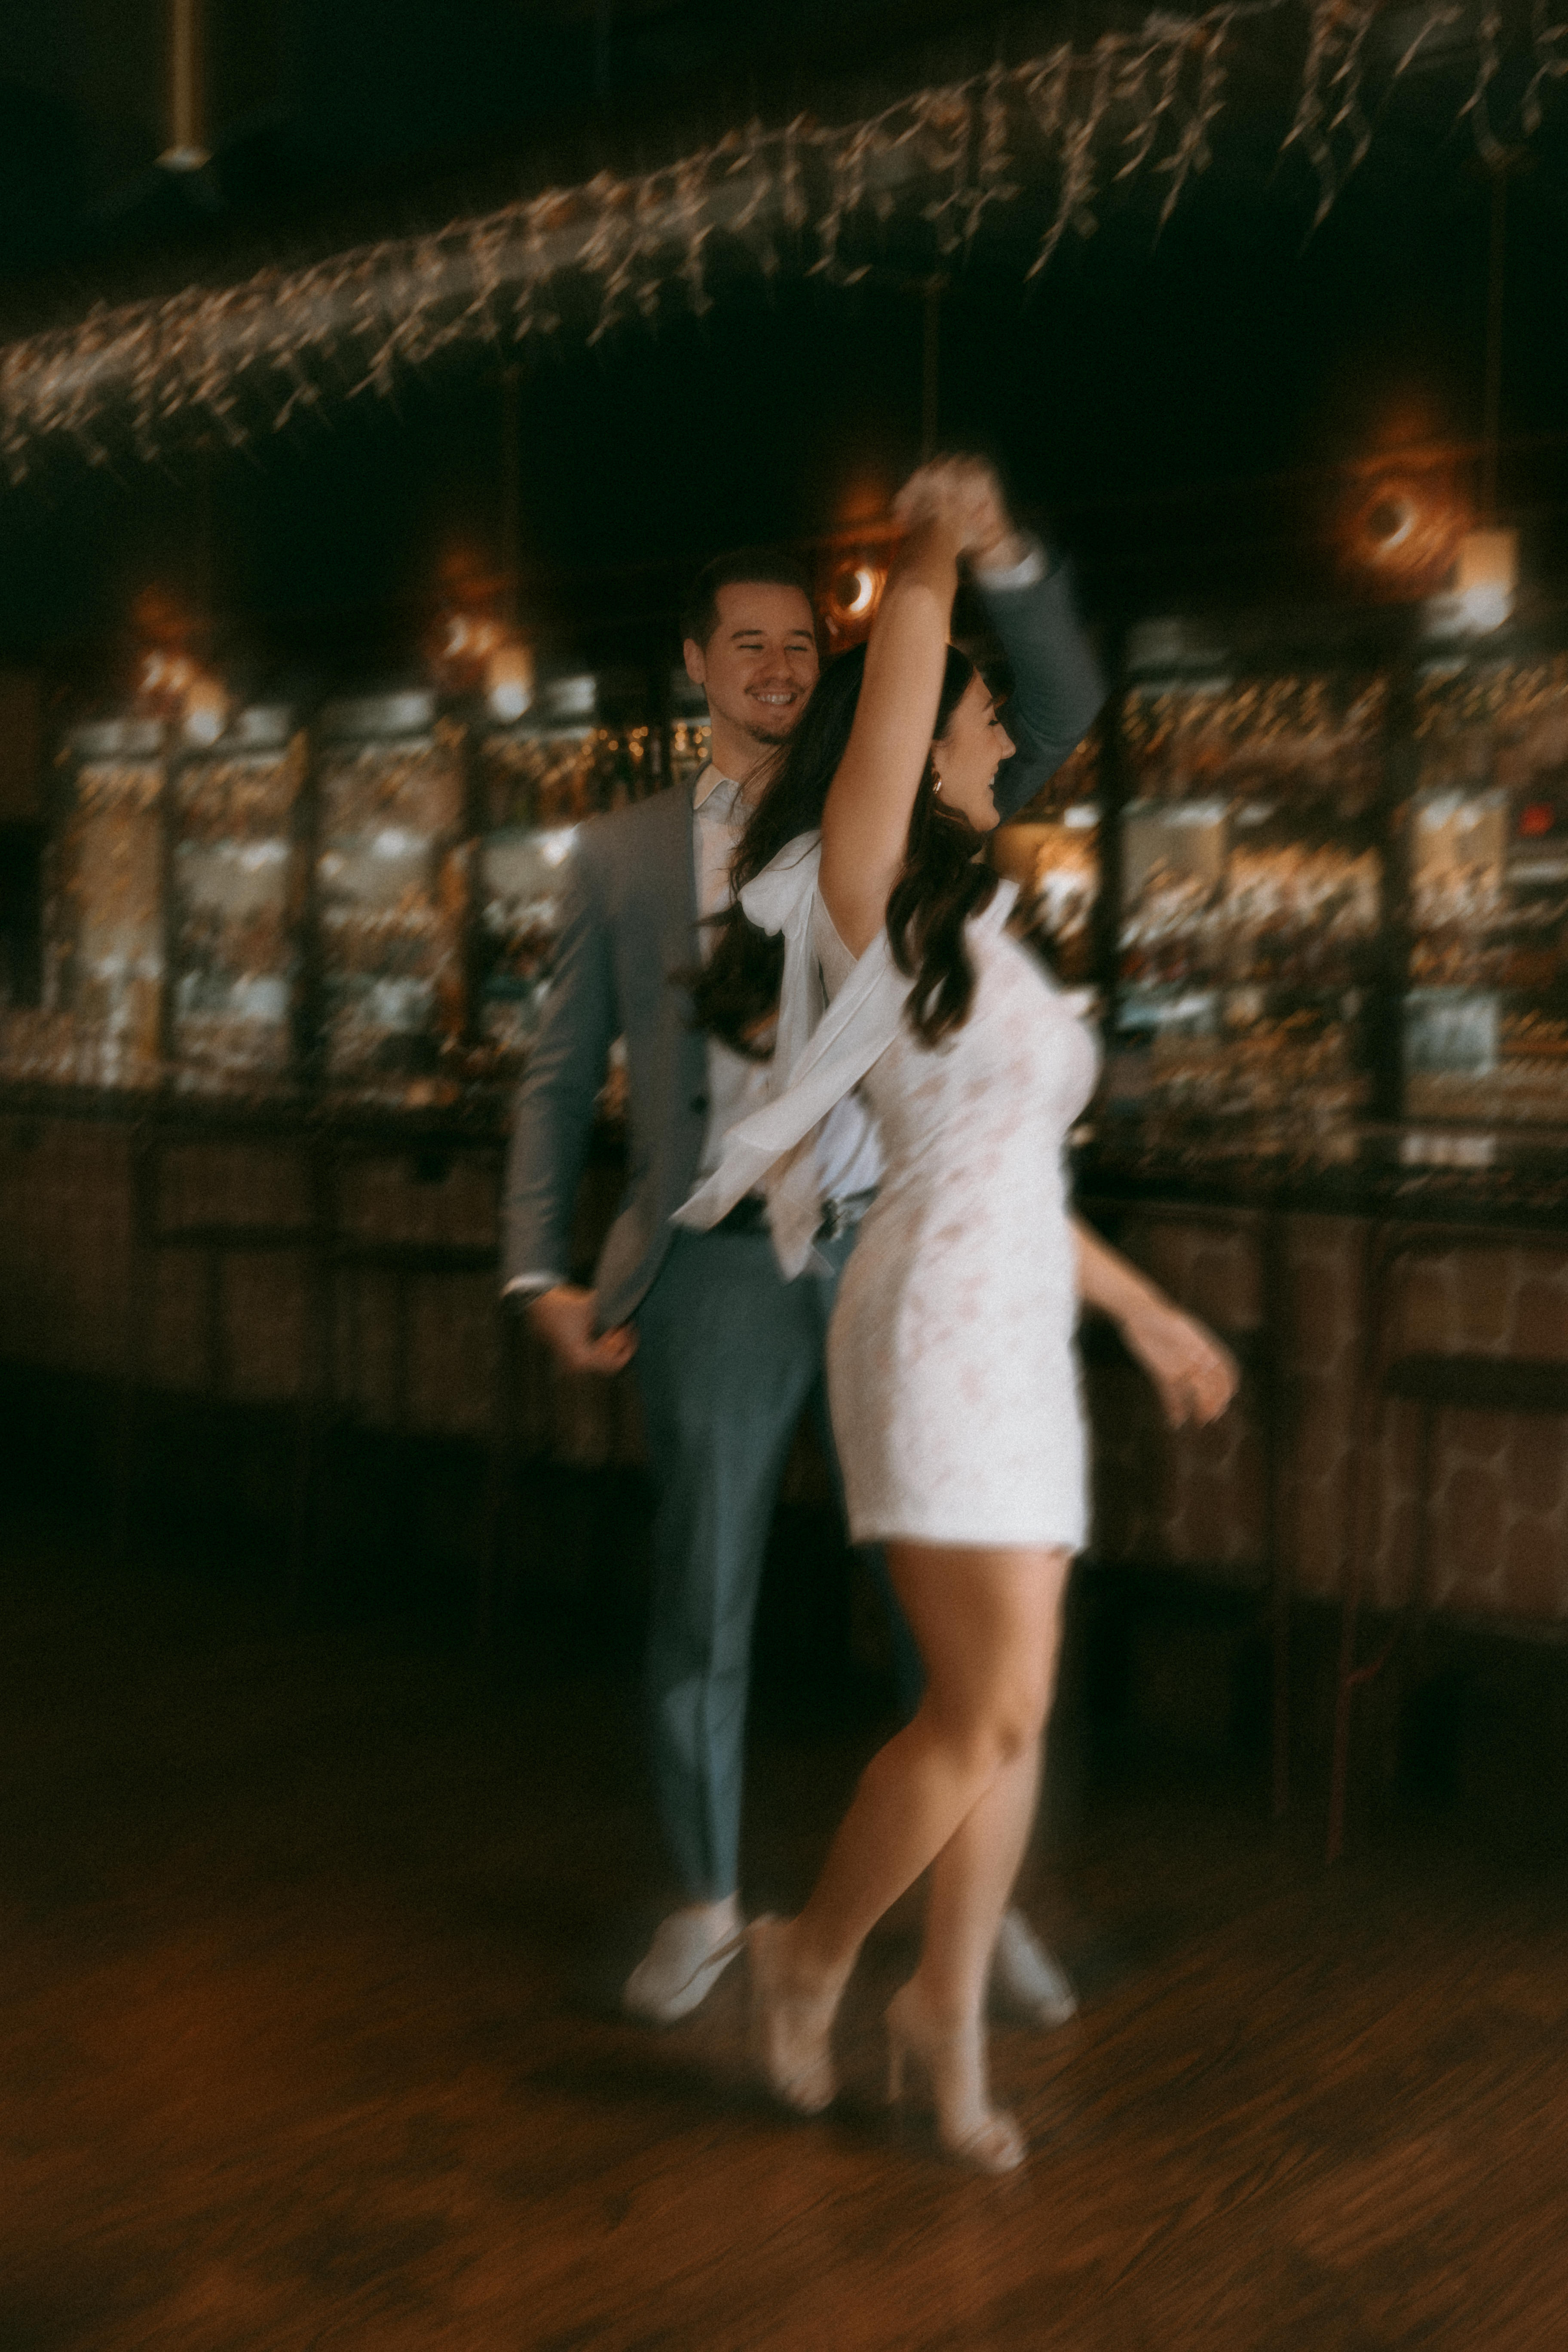 Blurry Engagement Photo Trend